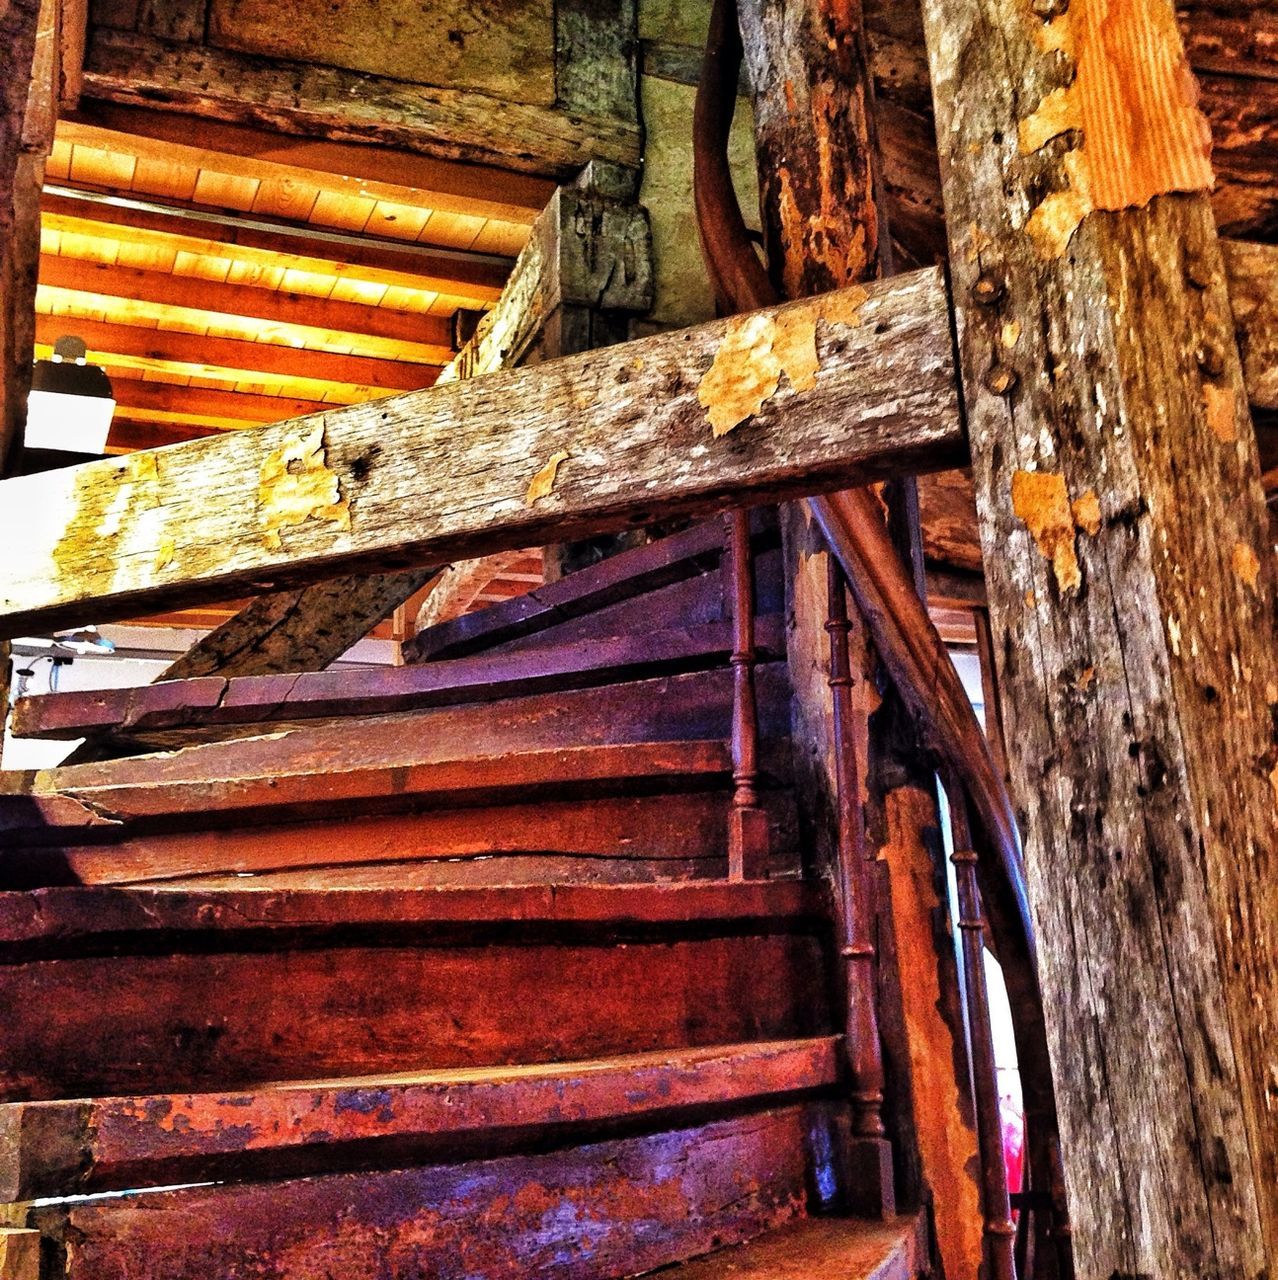 wood - material, old, weathered, damaged, abandoned, deterioration, obsolete, run-down, wooden, rusty, wood, built structure, close-up, bad condition, architecture, full frame, no people, outdoors, day, textured